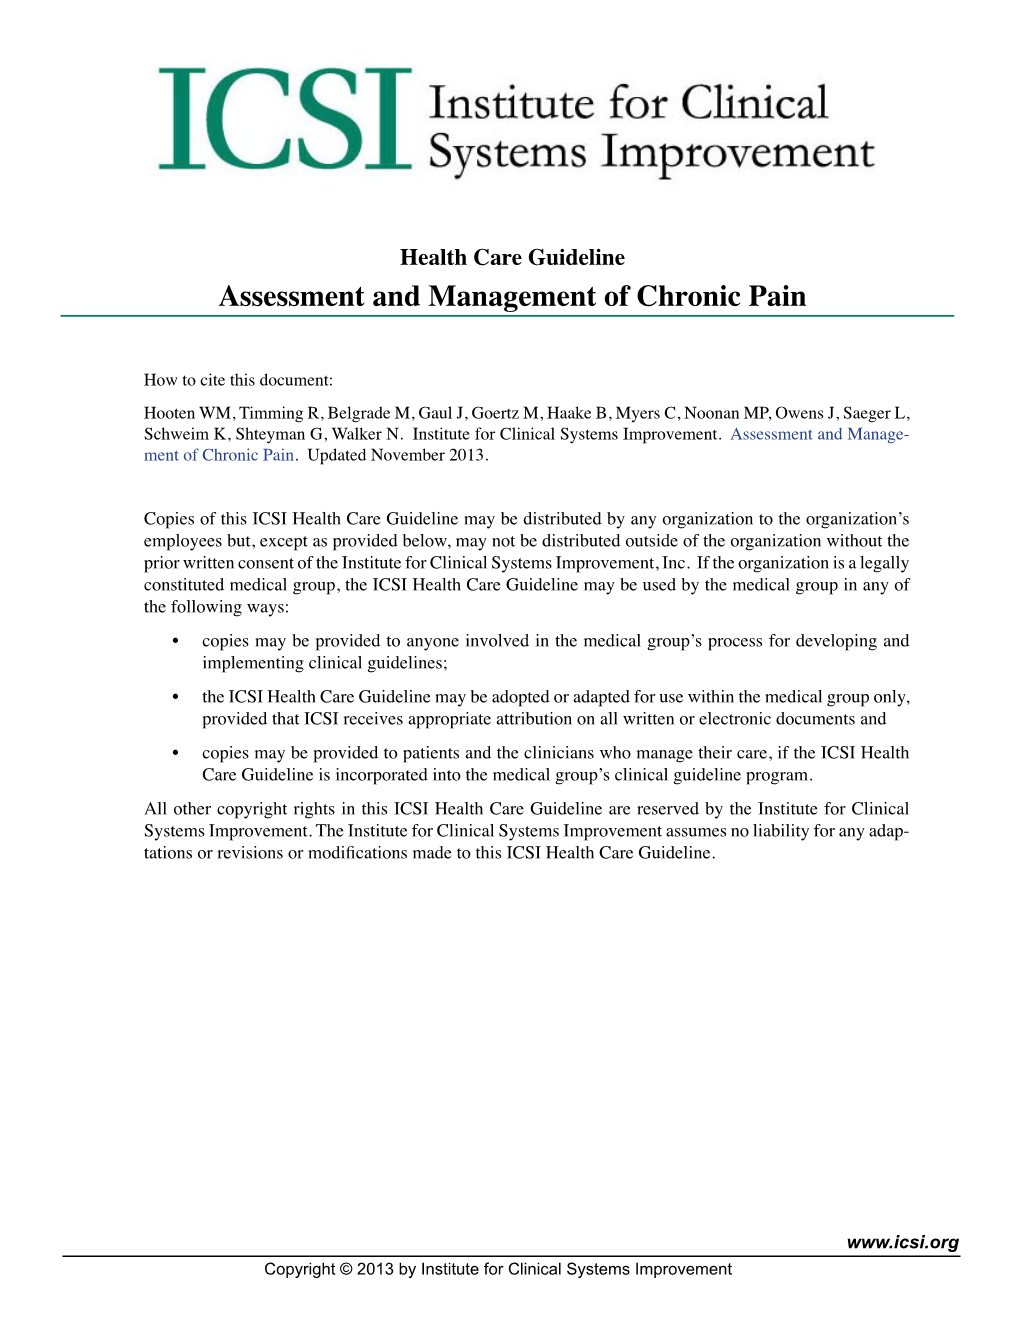 Assessment and Management of Chronic Pain